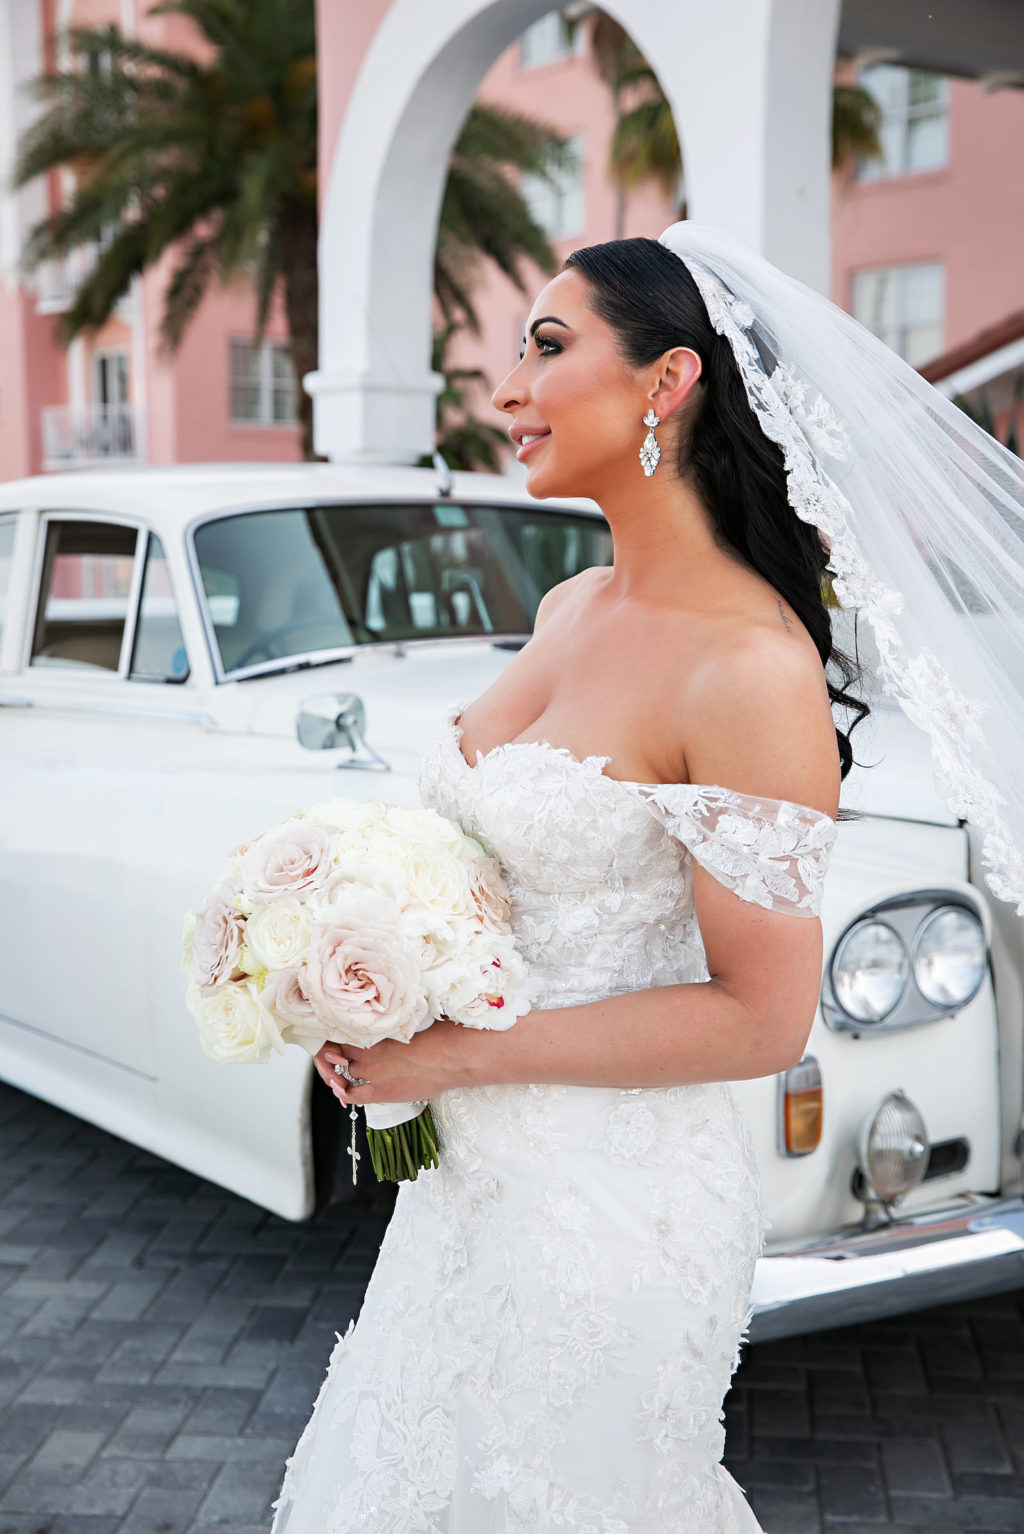 Florida Bride with Veil Flowing In Wind In Front of White Vintage Rolls Royce, Bride Wearing Rivini Off The Shoulder Fit and Flare Lace Wedding Dress, Holding Classic Round Bouquet with Ivory and Blush Pink Roses | Historic Tampa Bay Wedding Venue The Don CeSar | Florida Wedding Photographer Limelight Photography | St. Pete Beach Wedding Florist Iza's Flowers | South Tampa Bridal Boutique Isabel O'Neil Bridal Collection